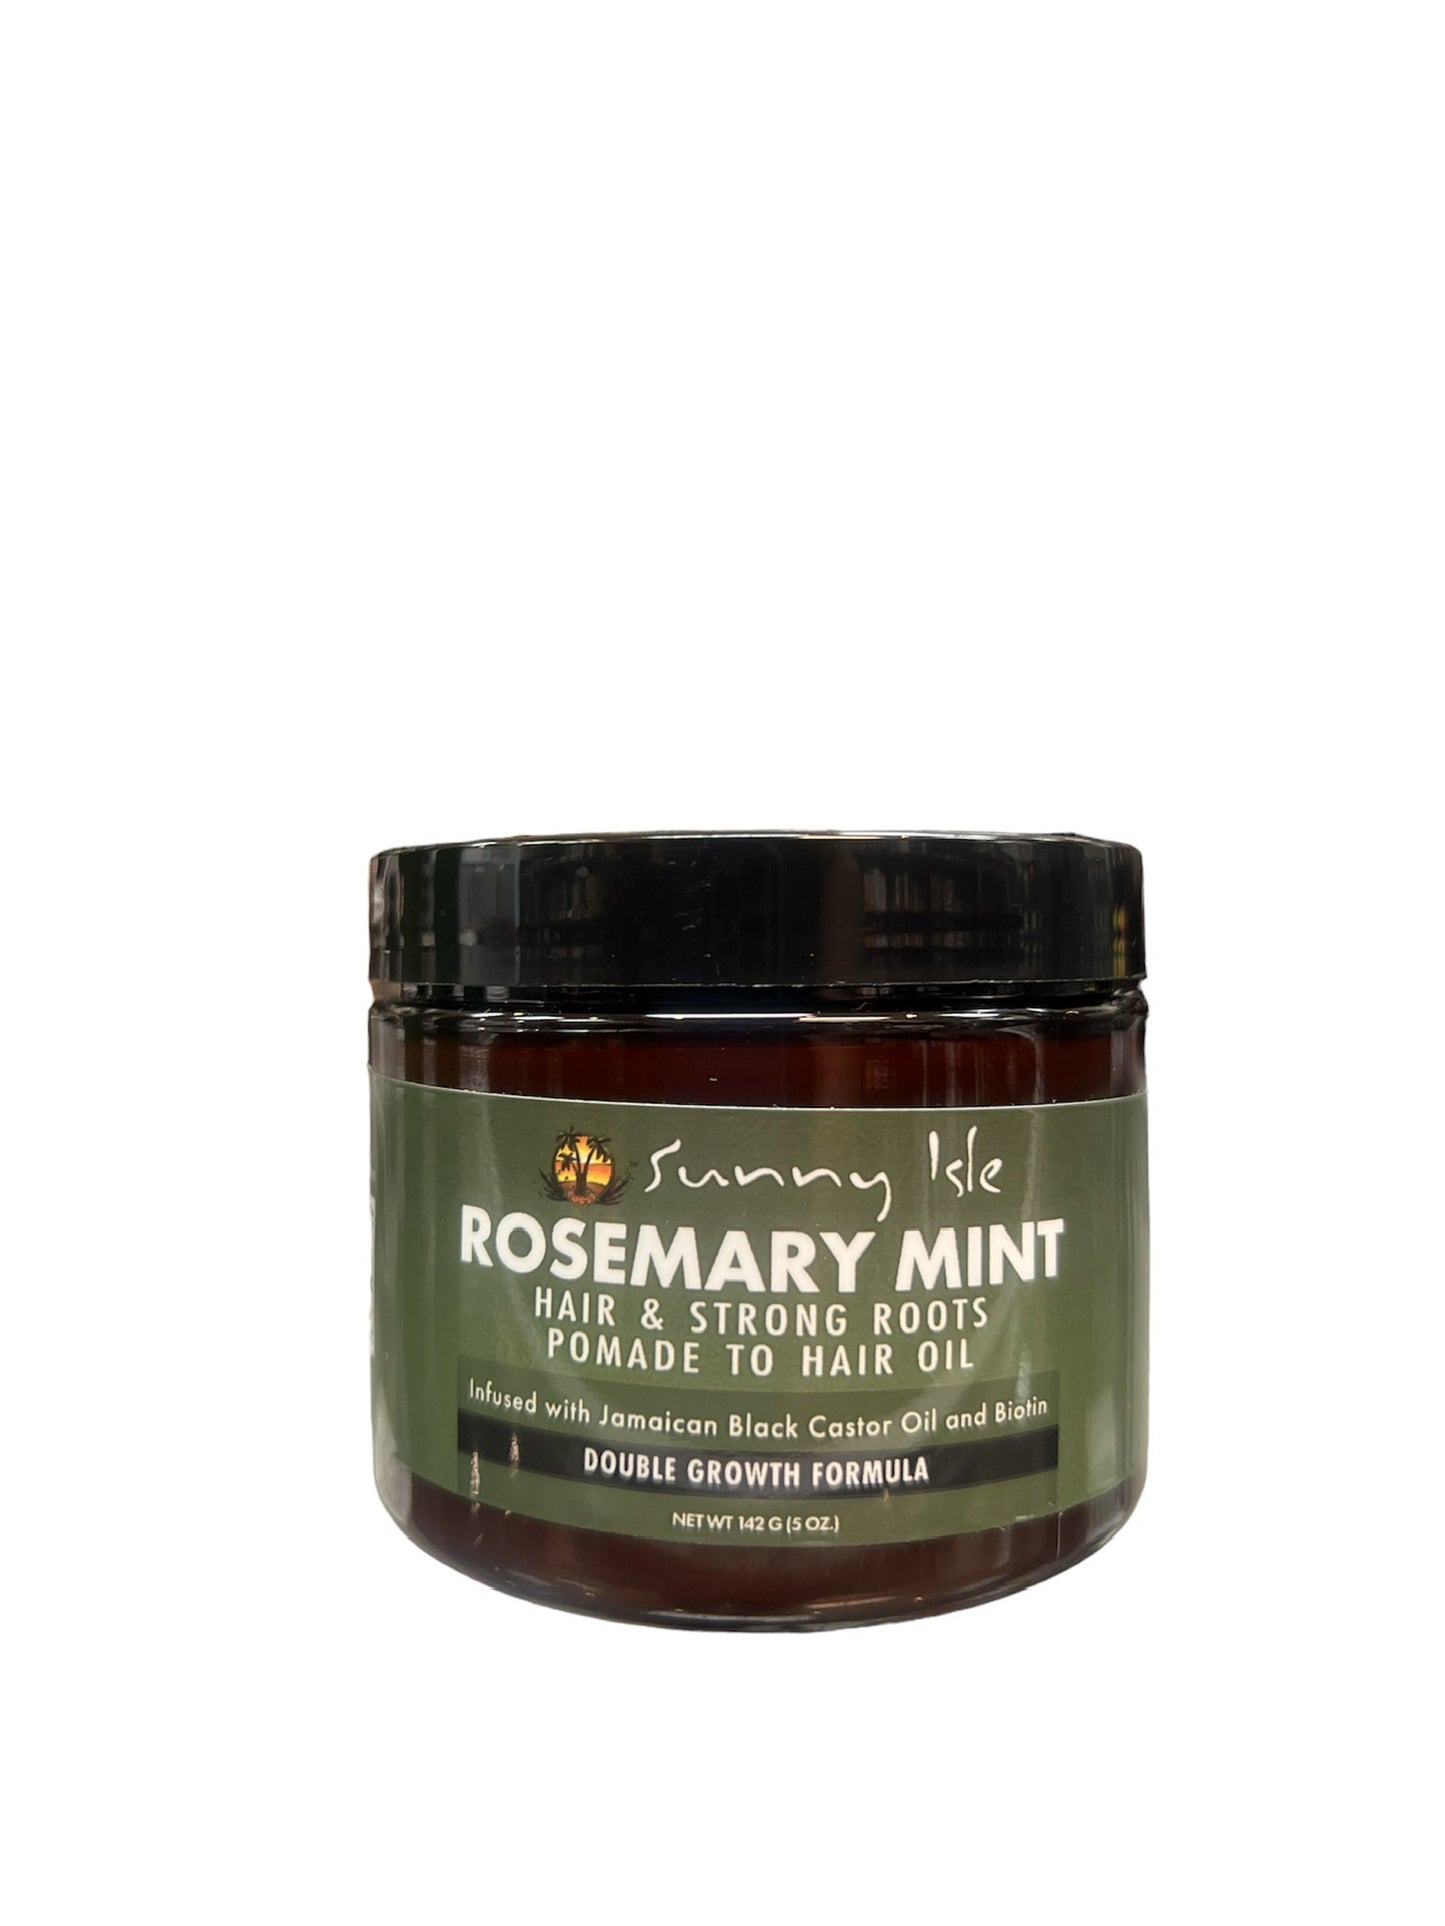 Rosemary Mint Hair & Strong Roots Oil / Pomade